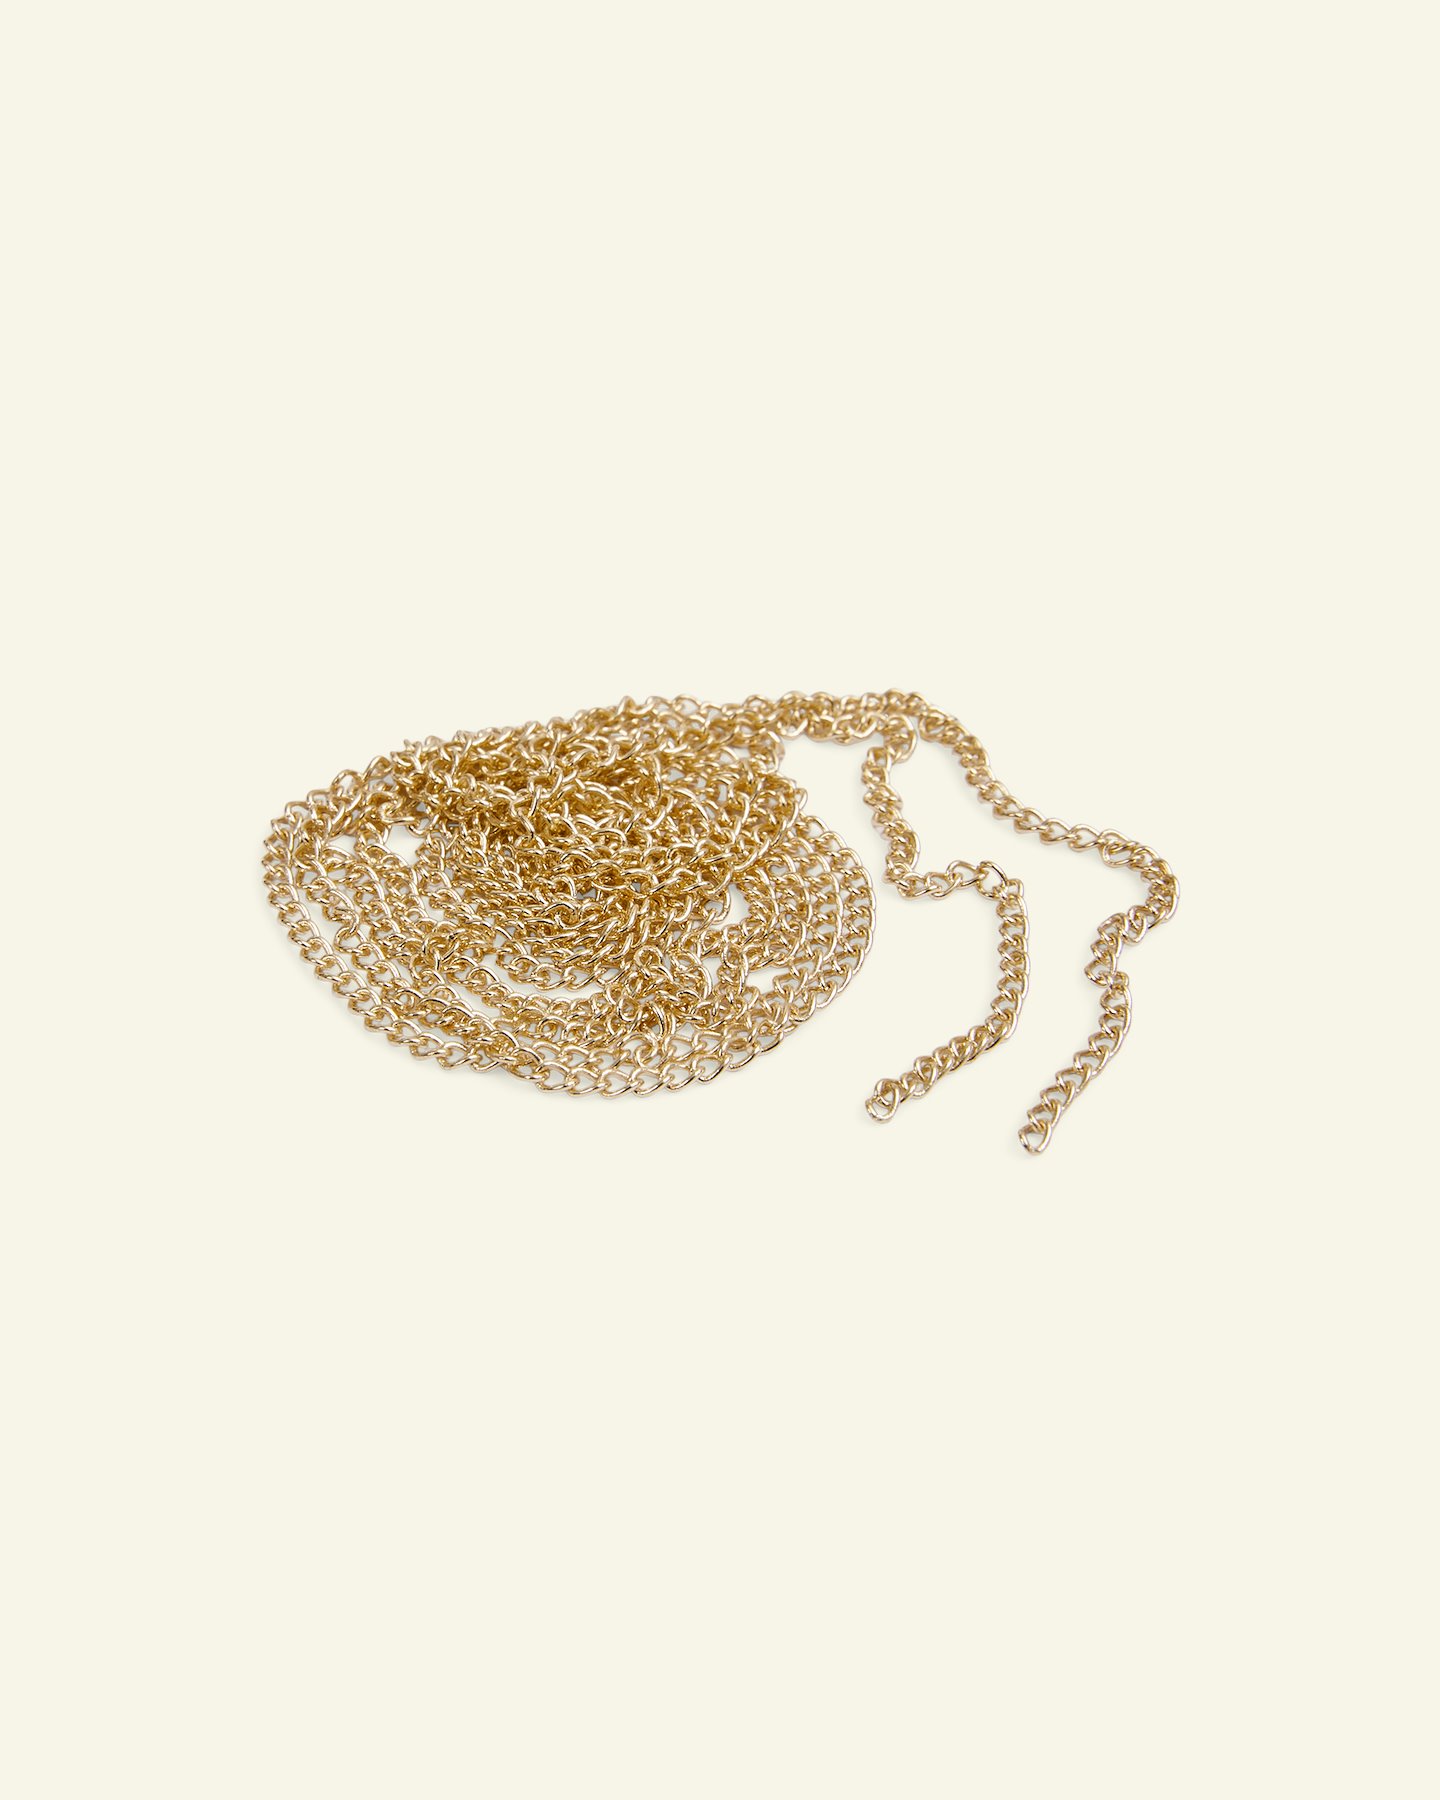 Chain 3mm gold colored 1m 45995_pack